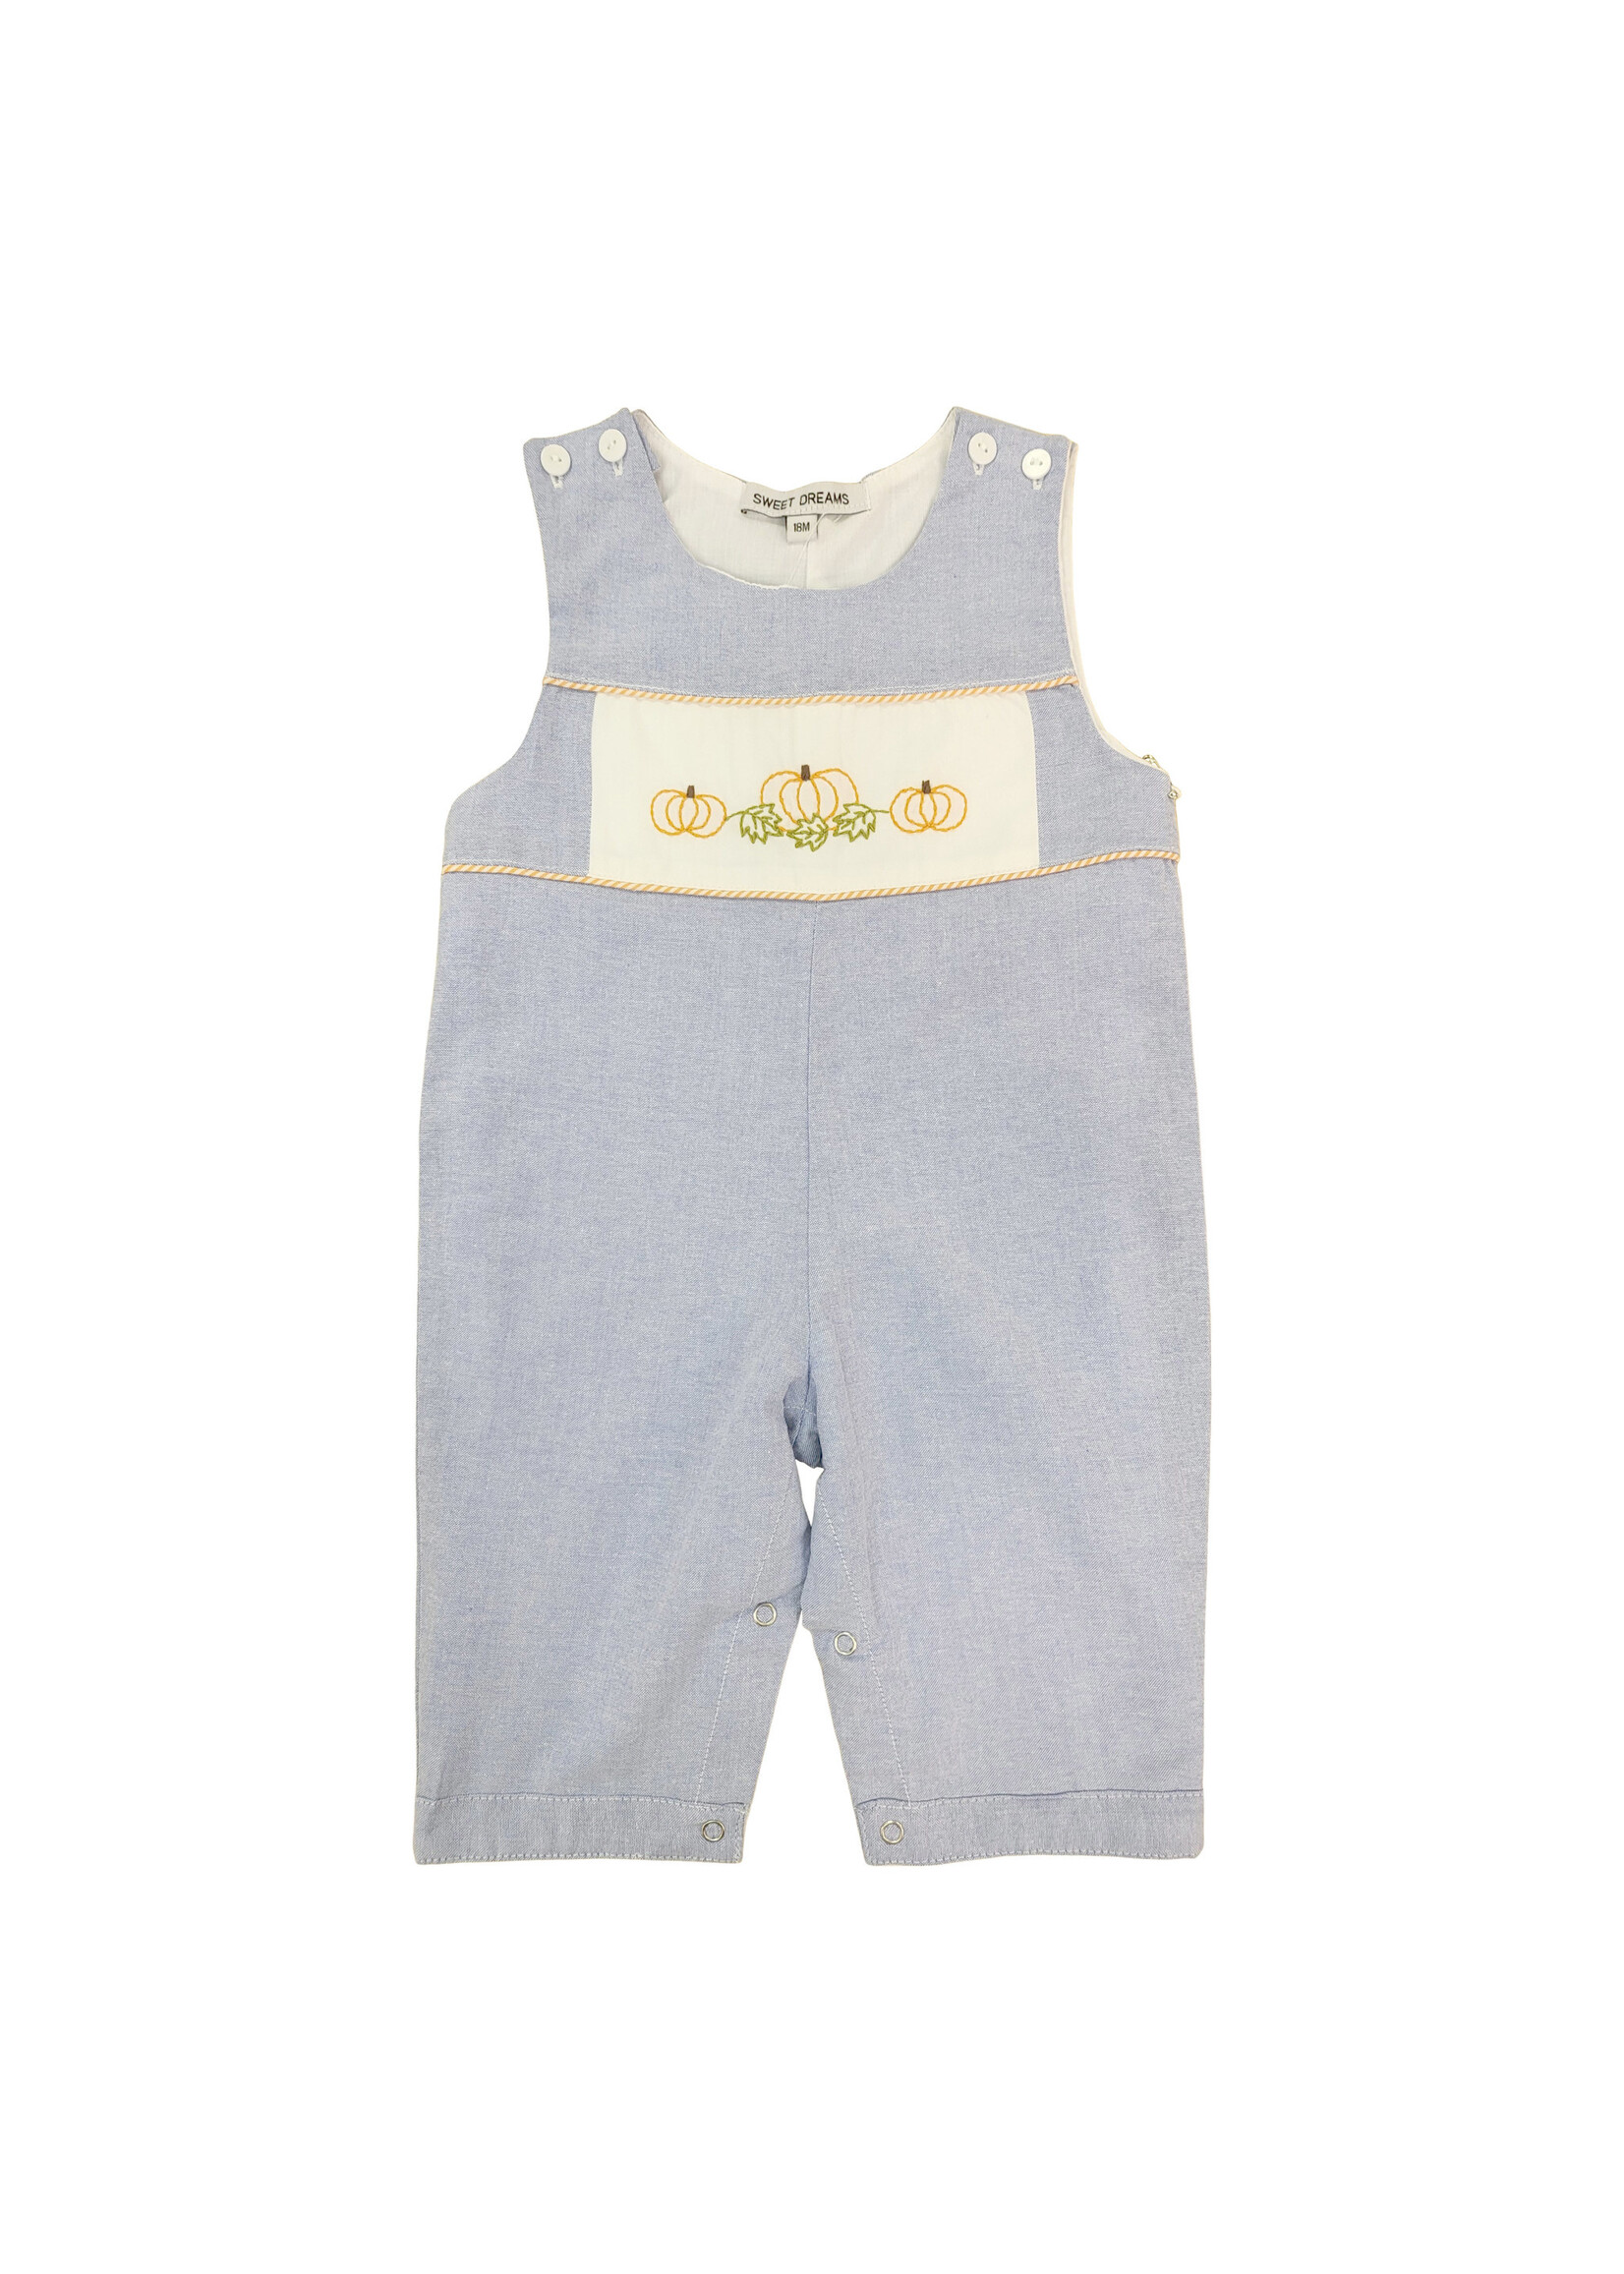 Sweet Dreams Chambray Embroidered Pumpkin Longall